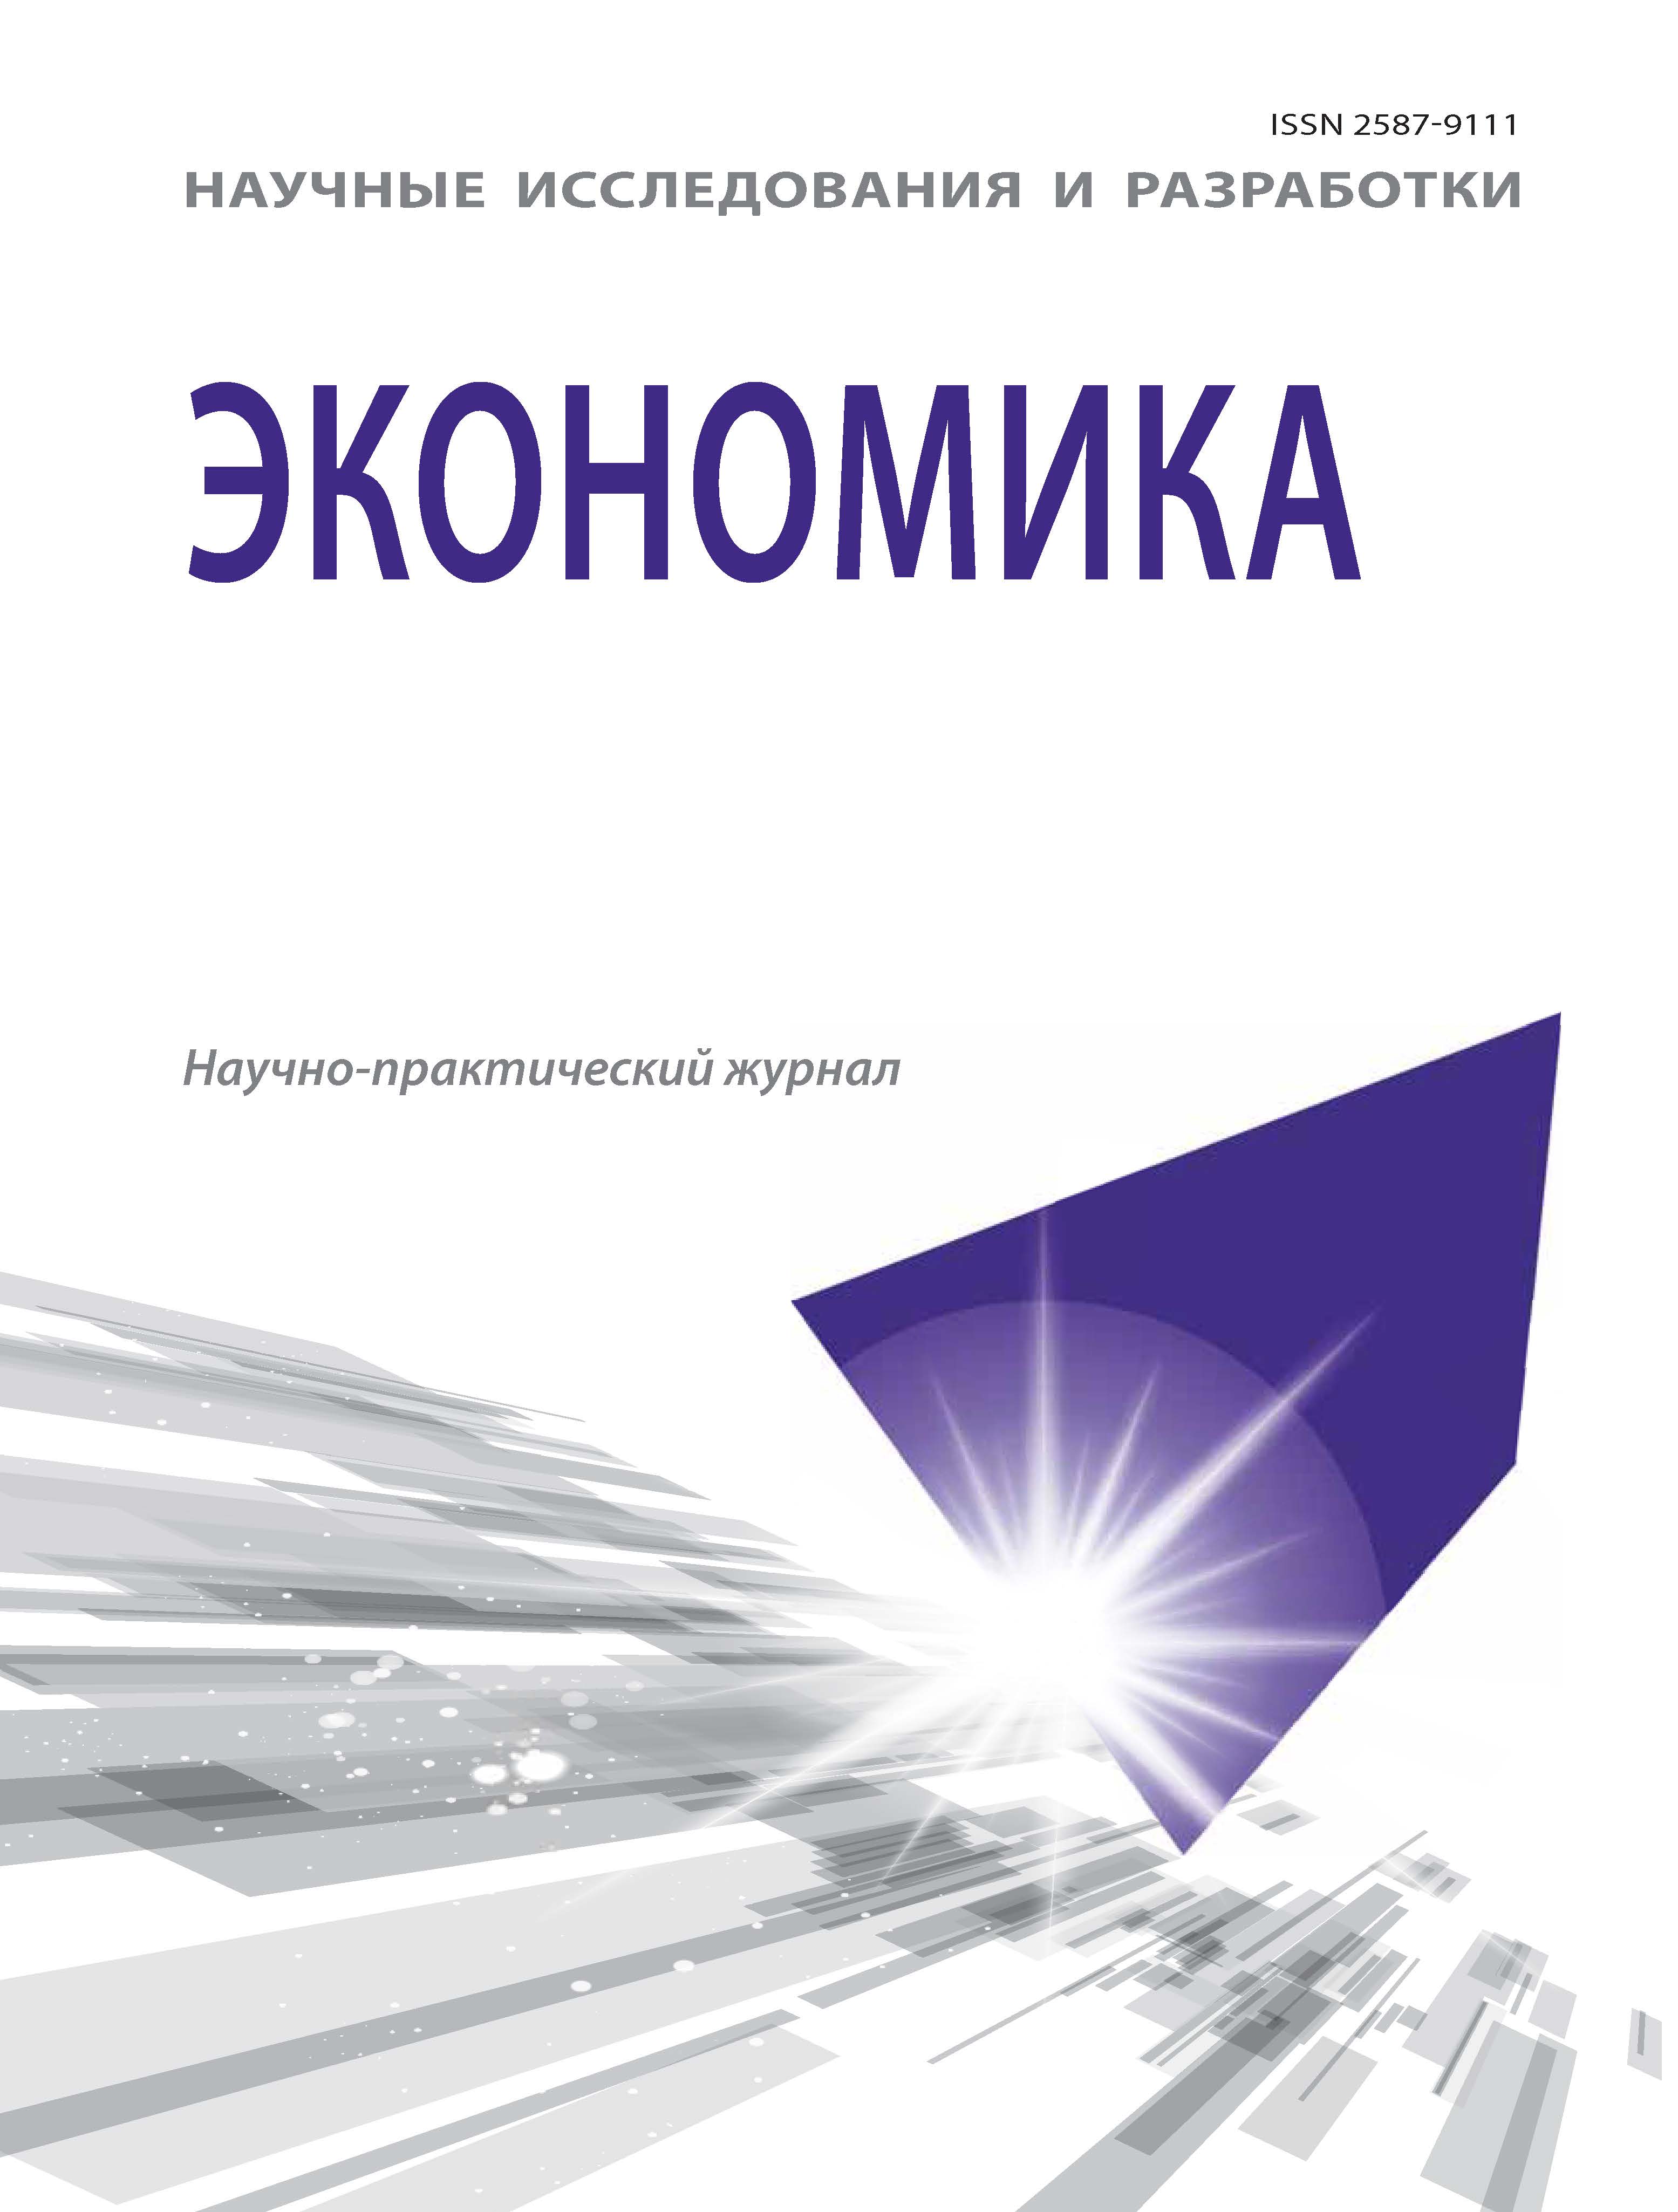                         Development of measures of municipal programs for the improvement of the territory, maintenance of life and satisfaction of the needs of residents
            